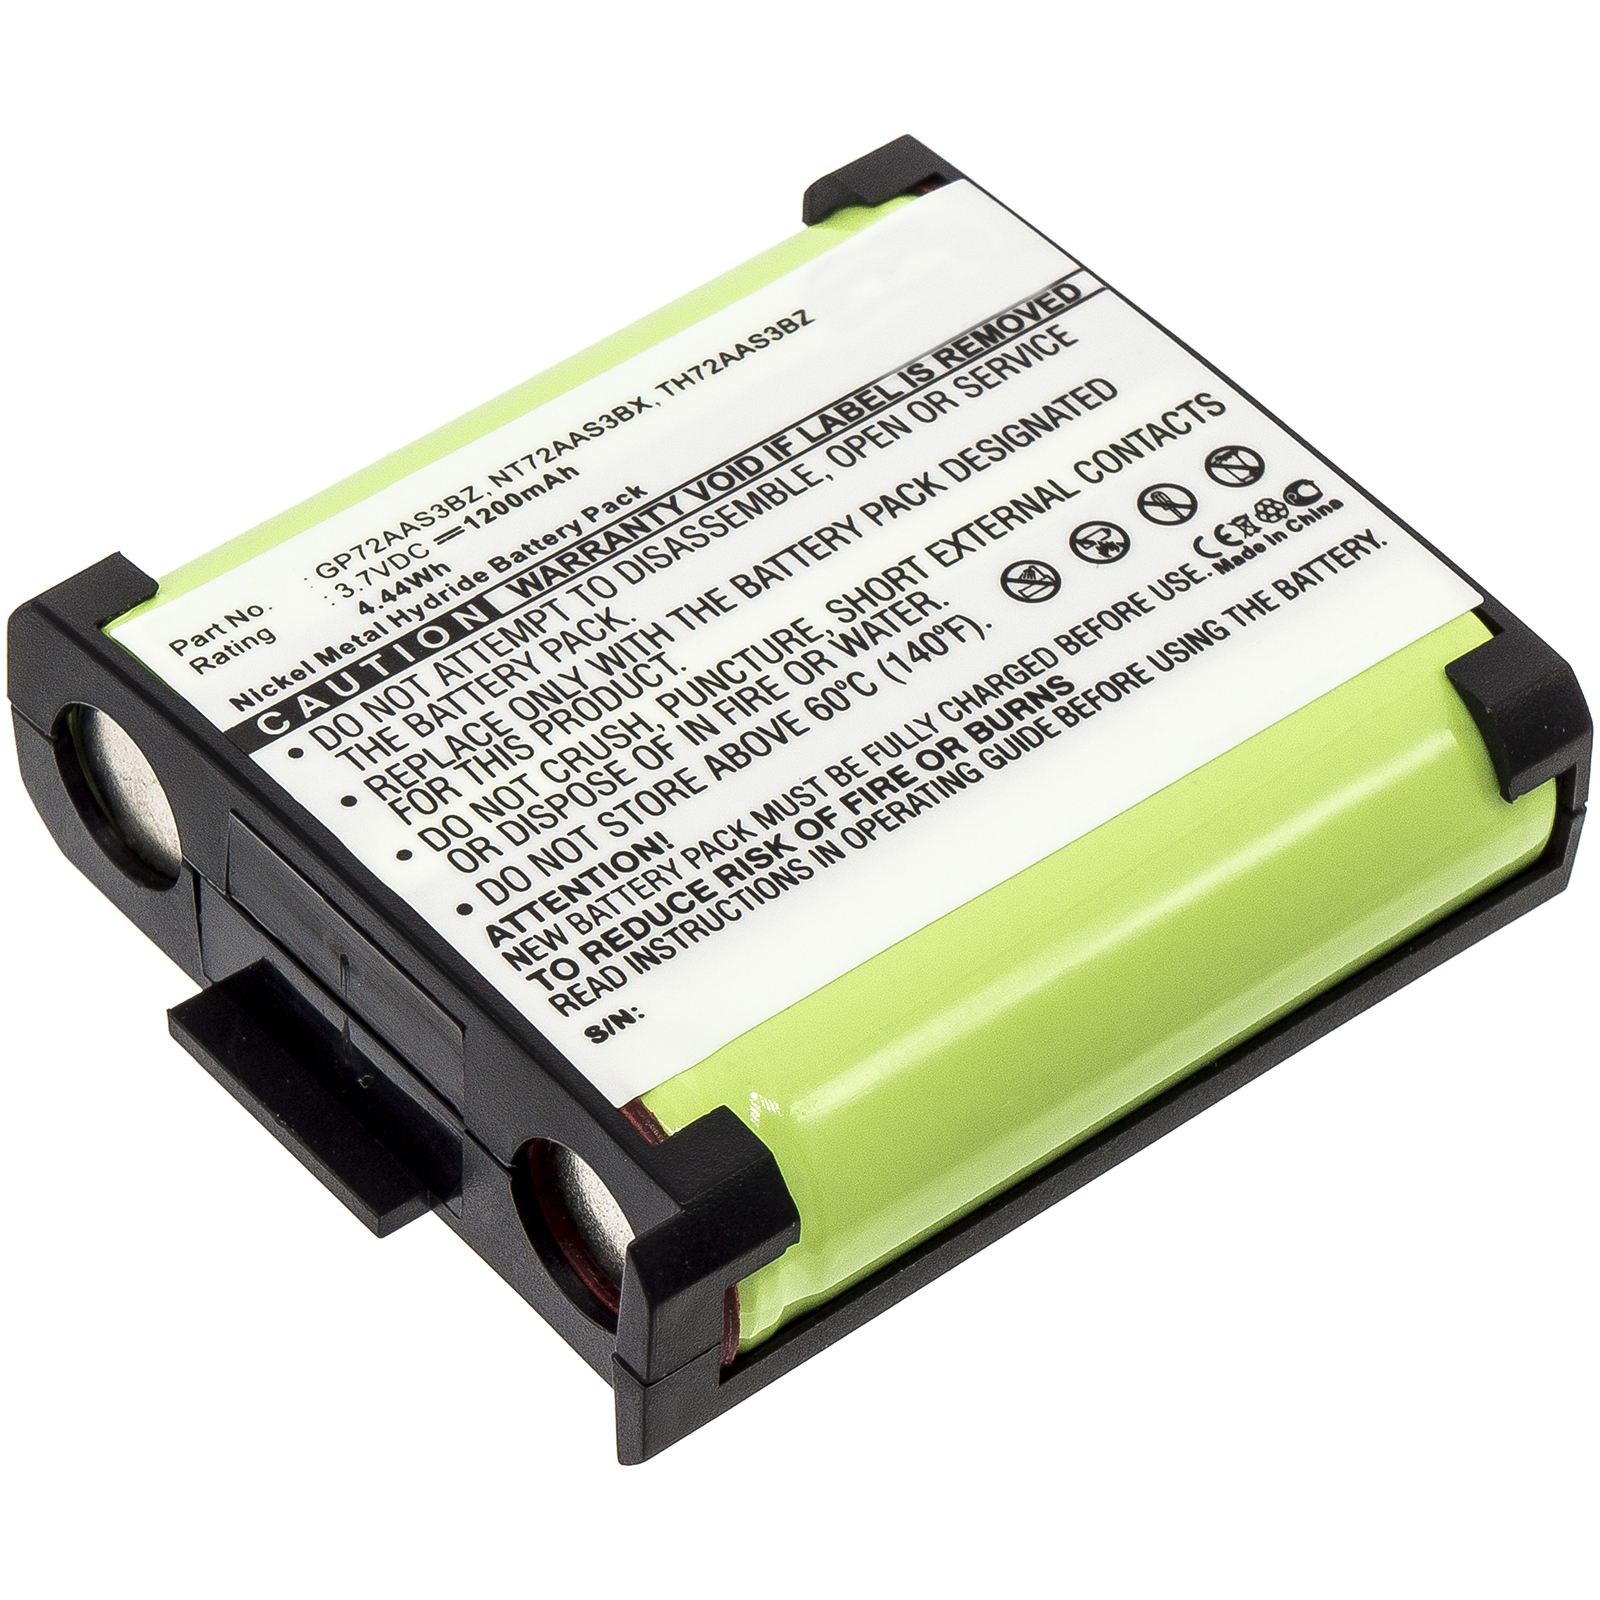 Synergy Digital Cordless Phone Battery, Compatiable with GE 2-9005, BT-38 Cordless Phone Battery (3.6V, Ni-MH, 1200mAh)